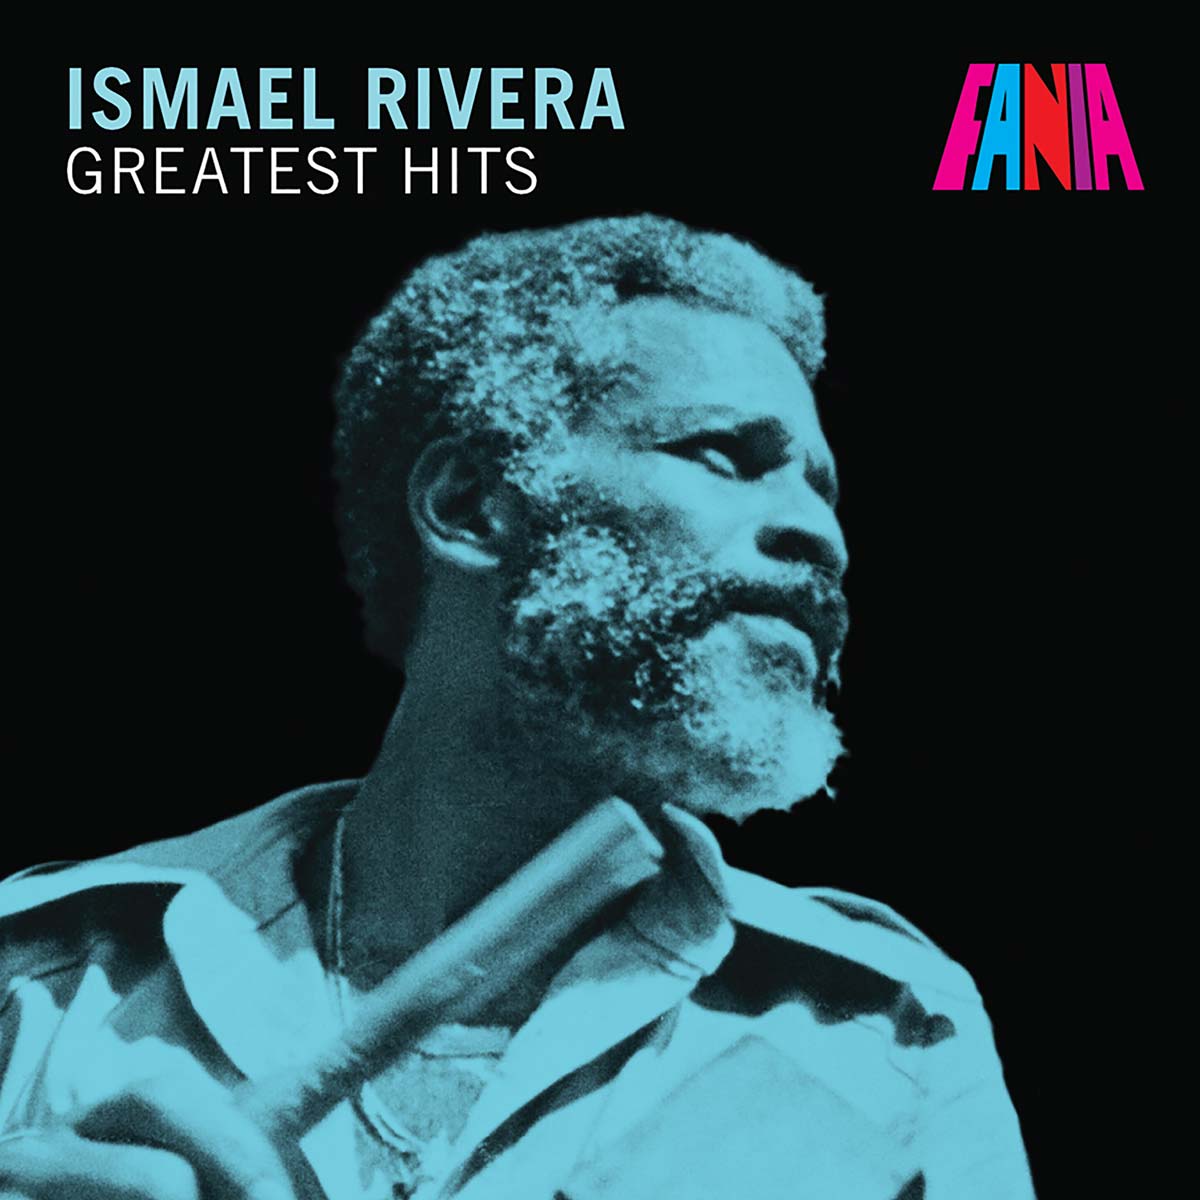 Featured Image for “ISMAEL RIVERA – GREATEST HITS”